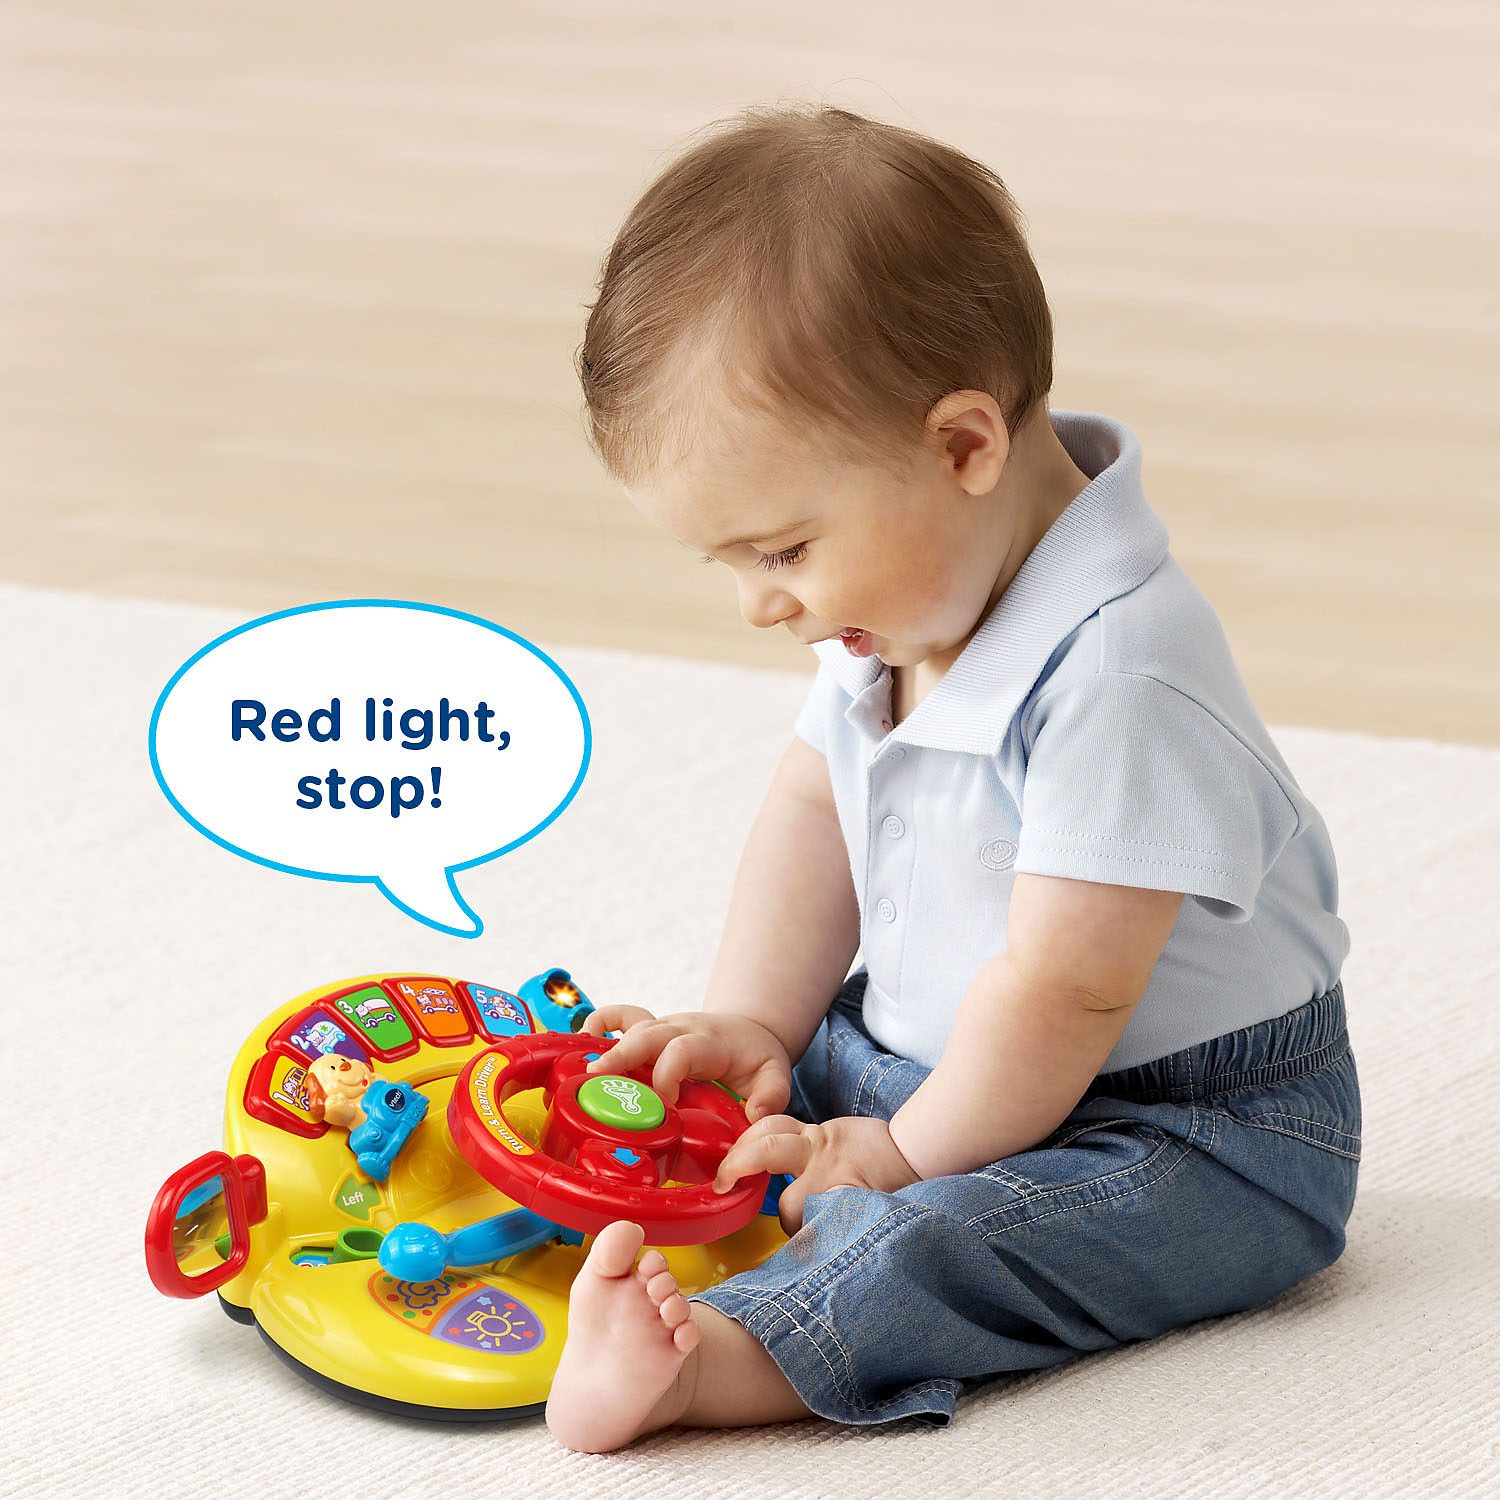 VTech Turn and Learn Driver, Role-Play Toy for Baby, Teaches Animals, Colors - image 3 of 8